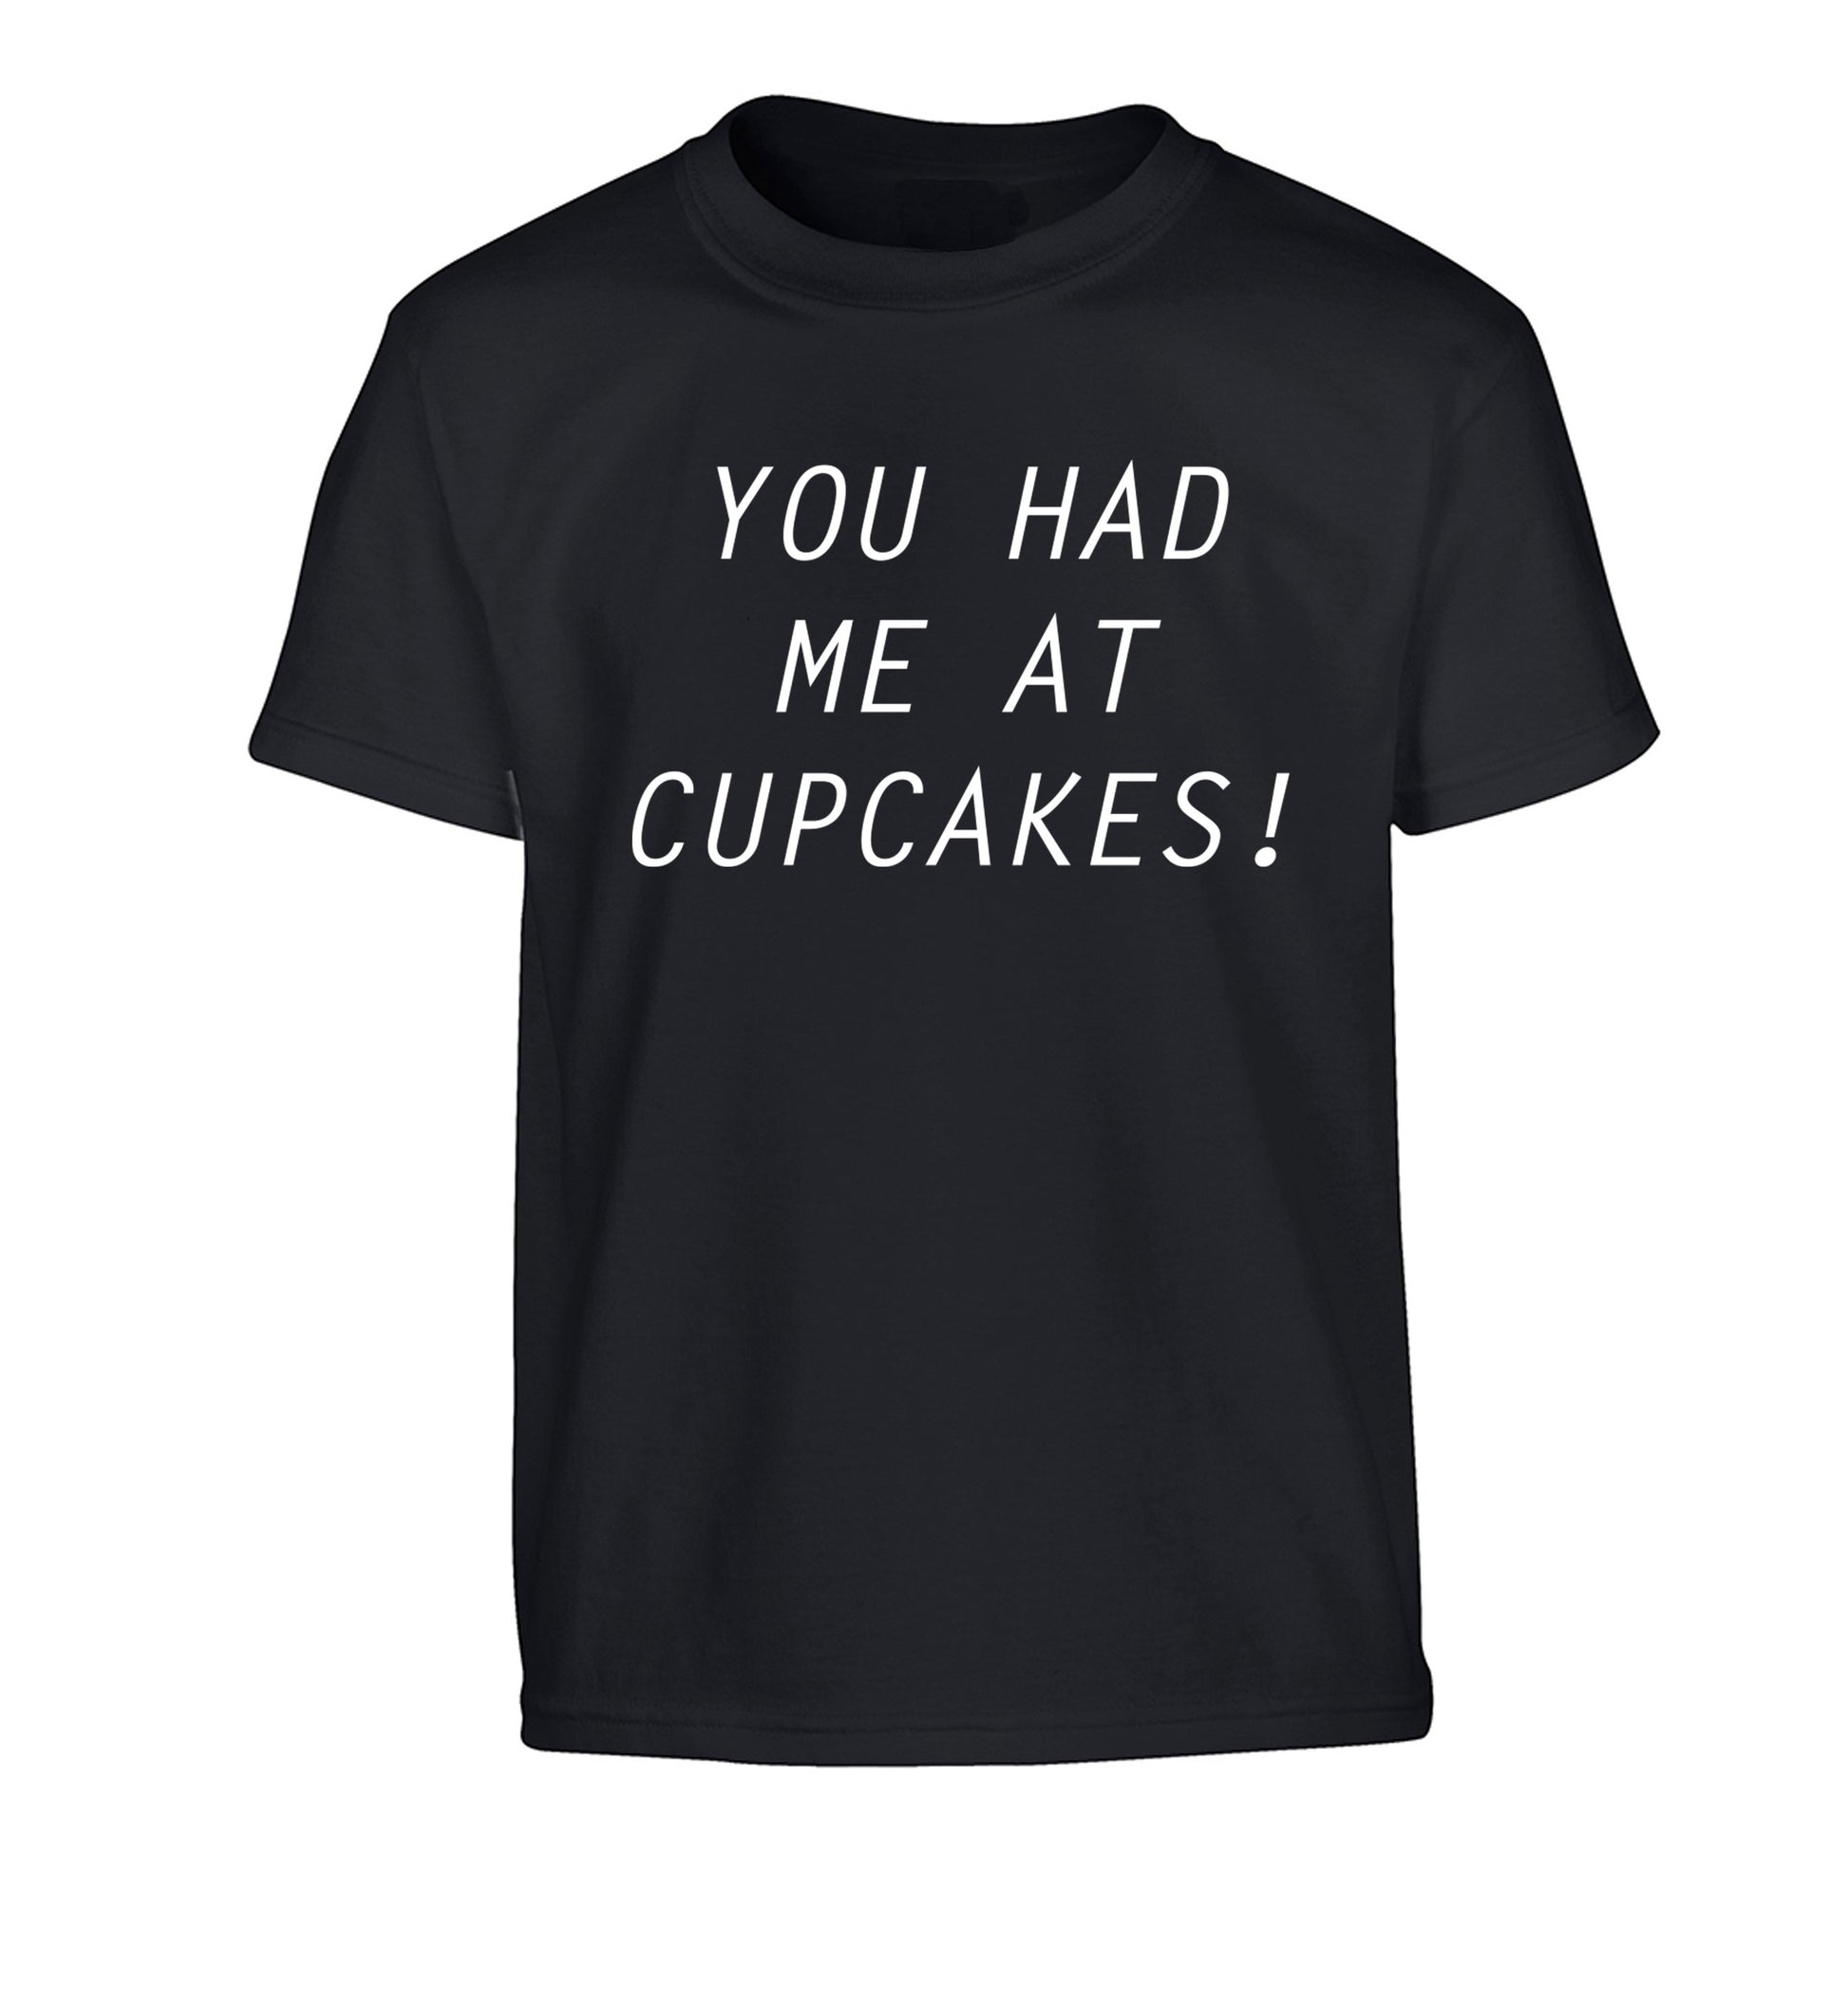 You had me at cupcakes Children's black Tshirt 12-14 Years